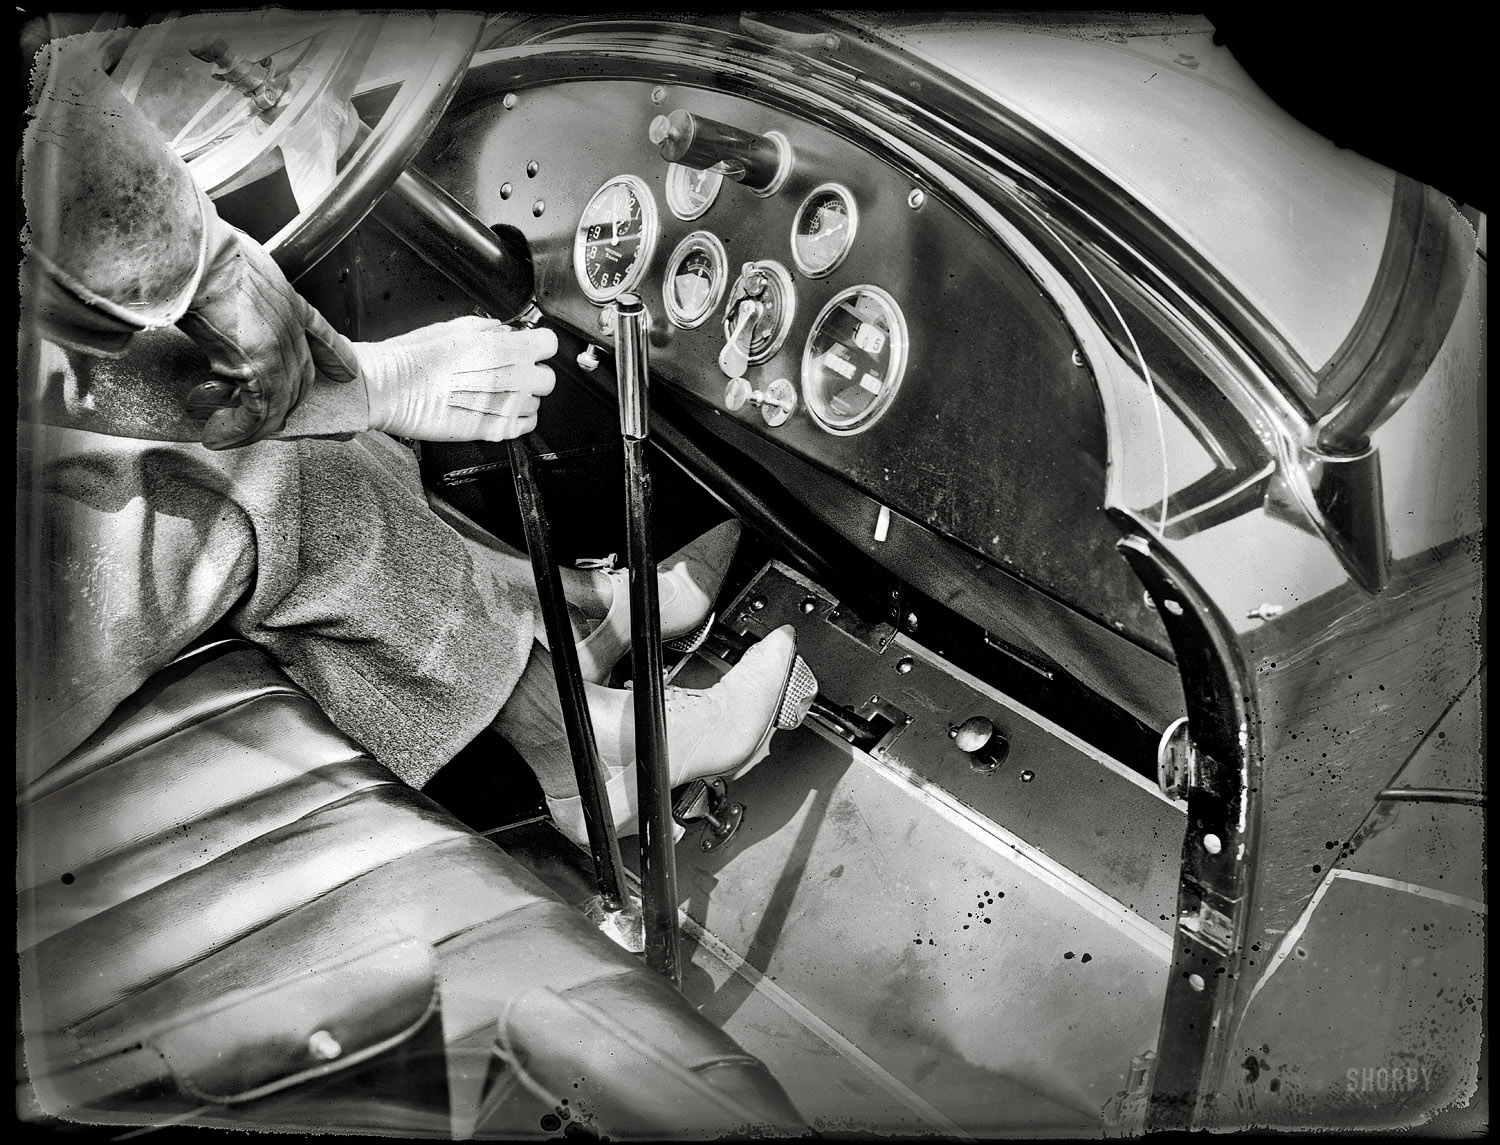 Washington circa 1919. "Woman being instructed in driving of automobile." National Photo Company Collection glass negative. View full size.